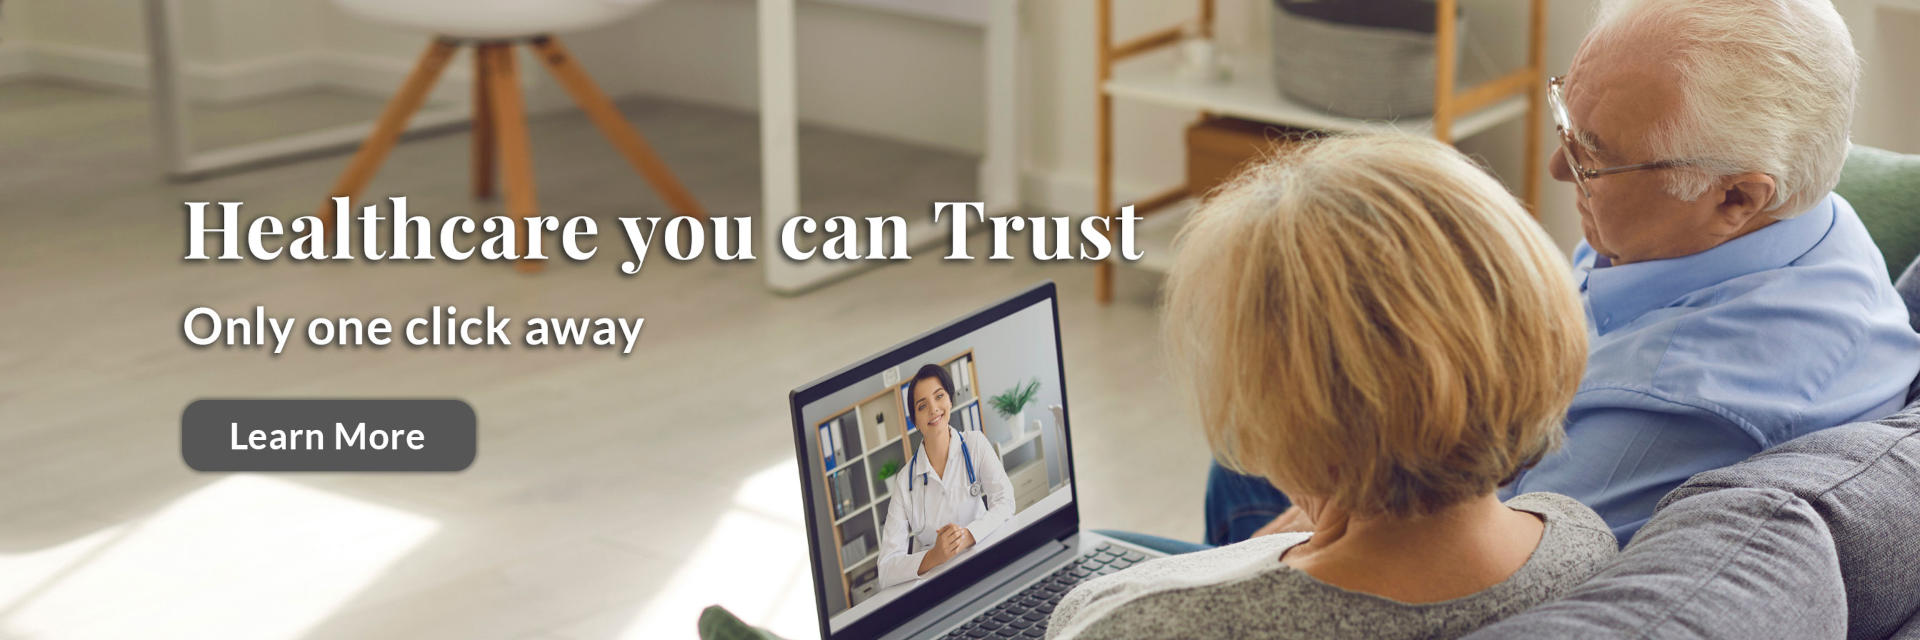 Healthcare you can Trust. Only one click awa. Learn more by clicking here